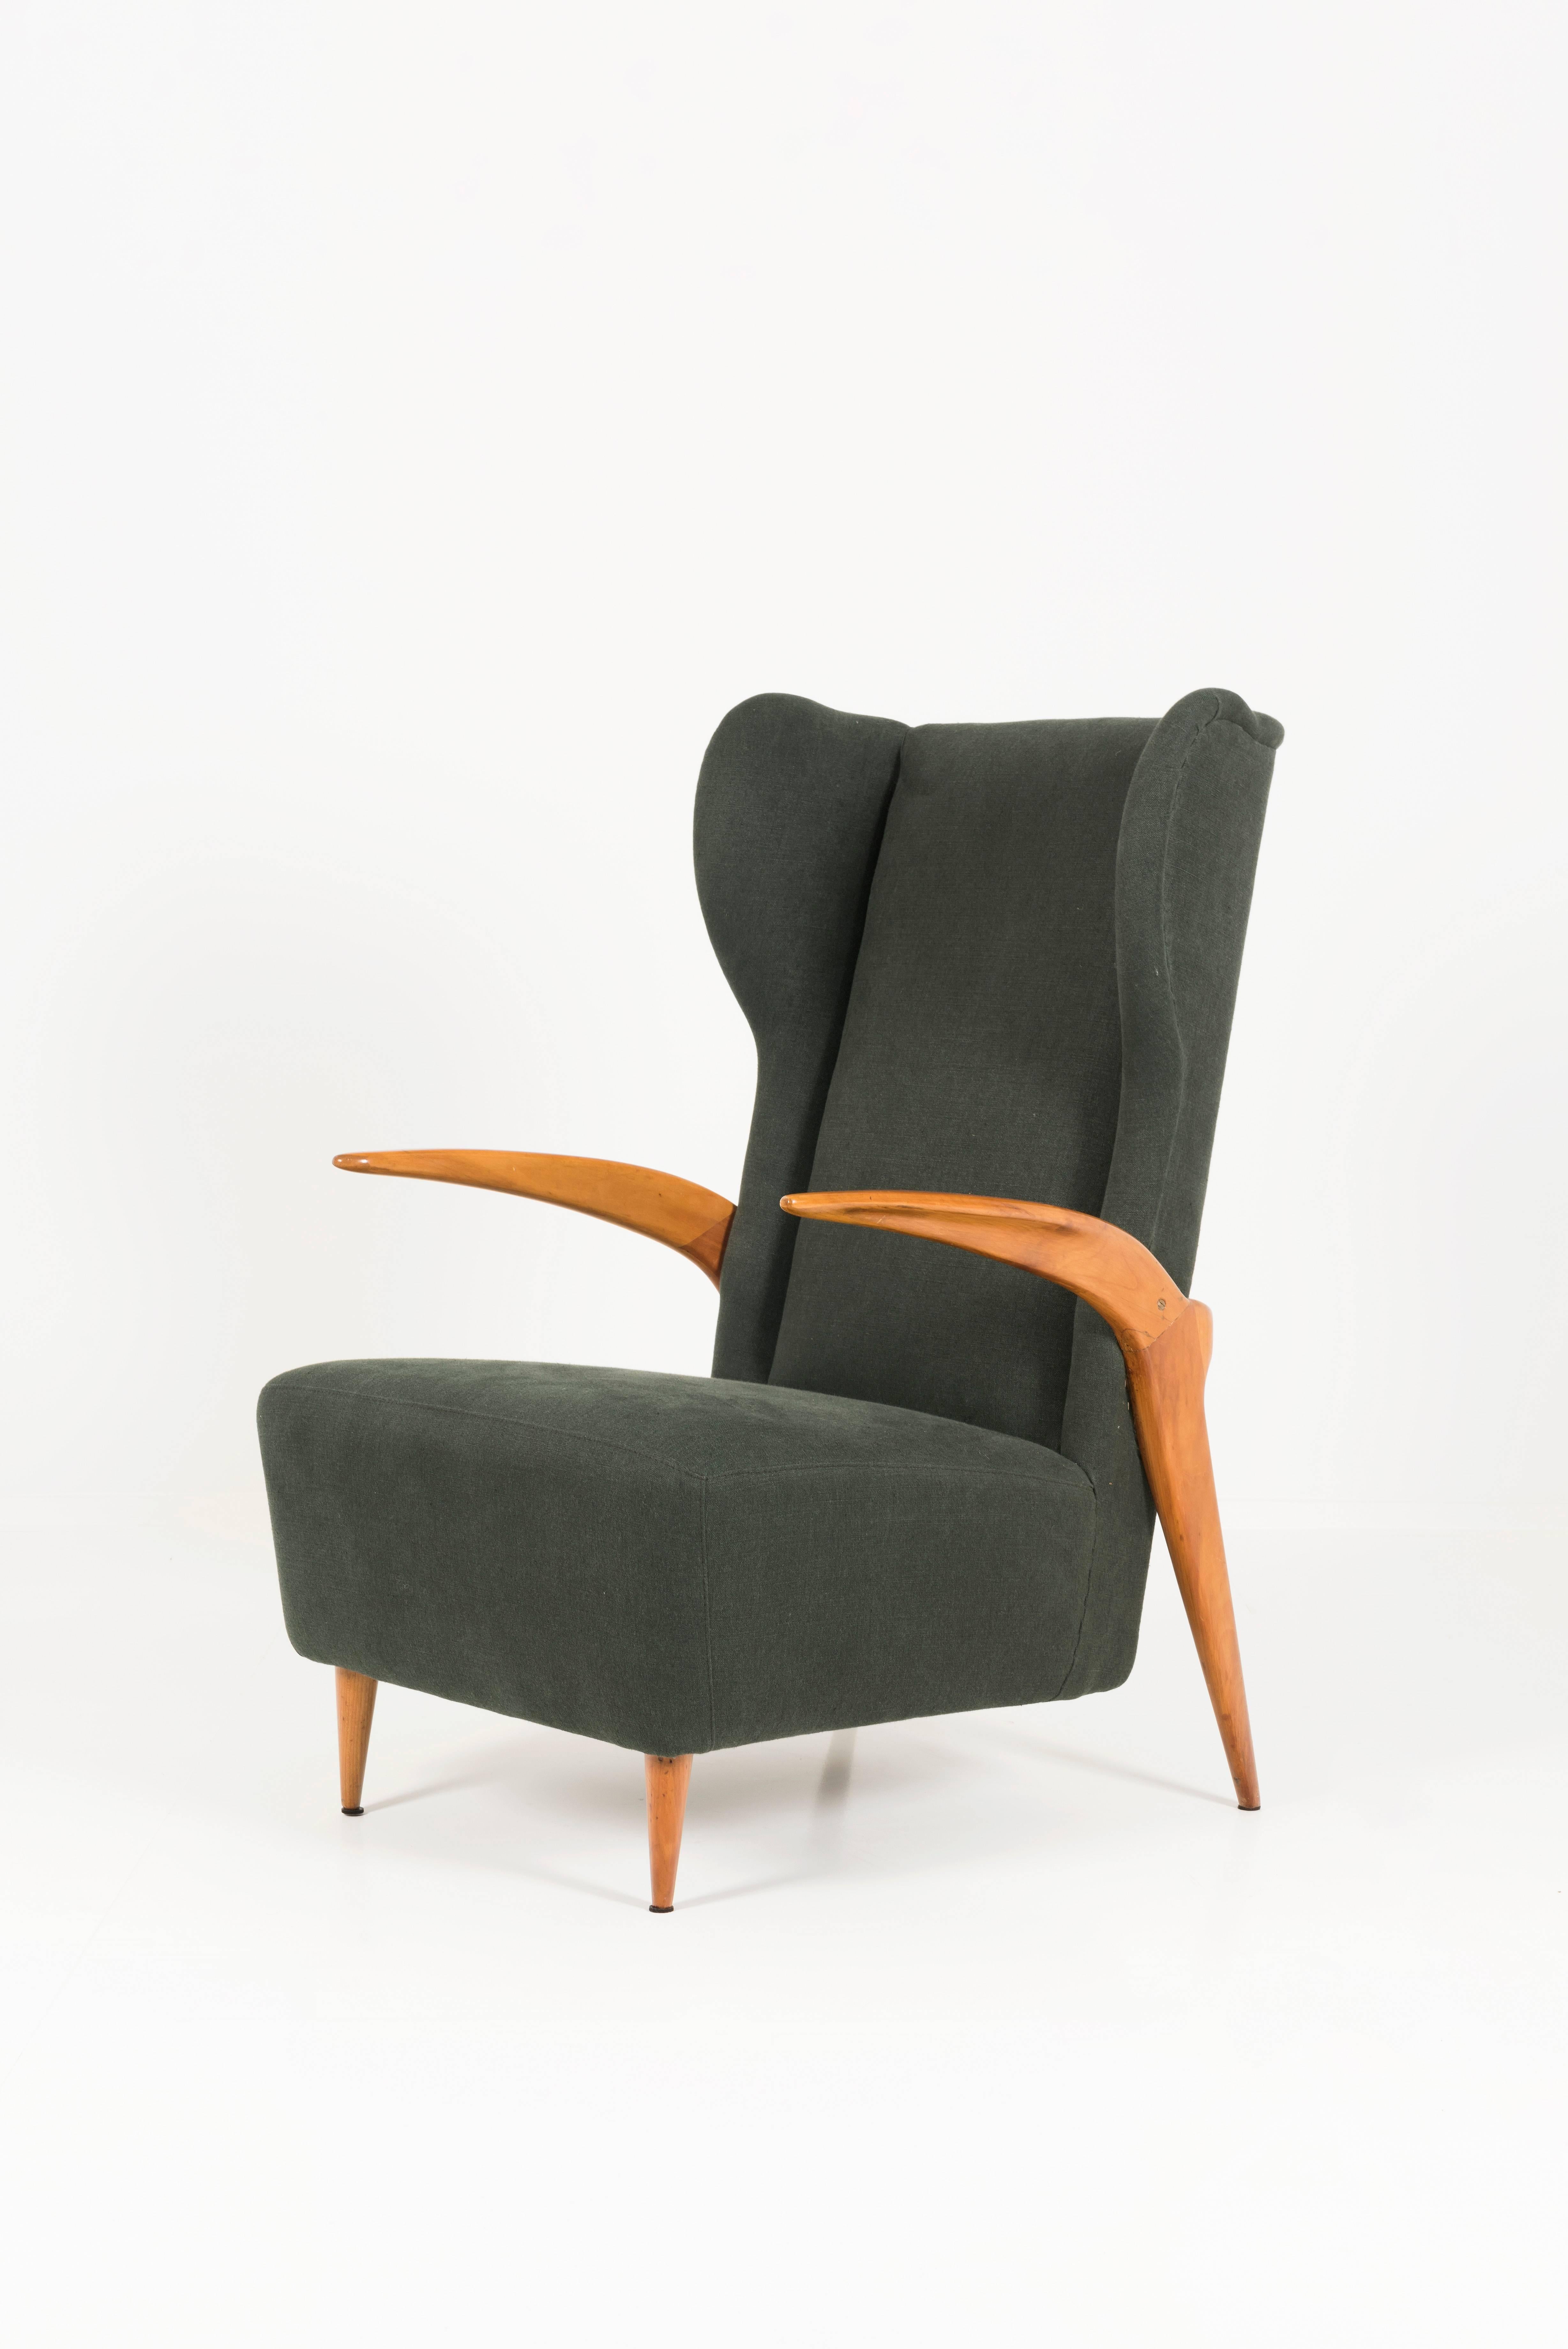 Two vintage armchairs with high back and dark green upholstery fabric, the structure is in polished cherrywood, attributed to Enrico Ciuti Italy, circa 1955
Measure: Height 69 x 70 cm deep.